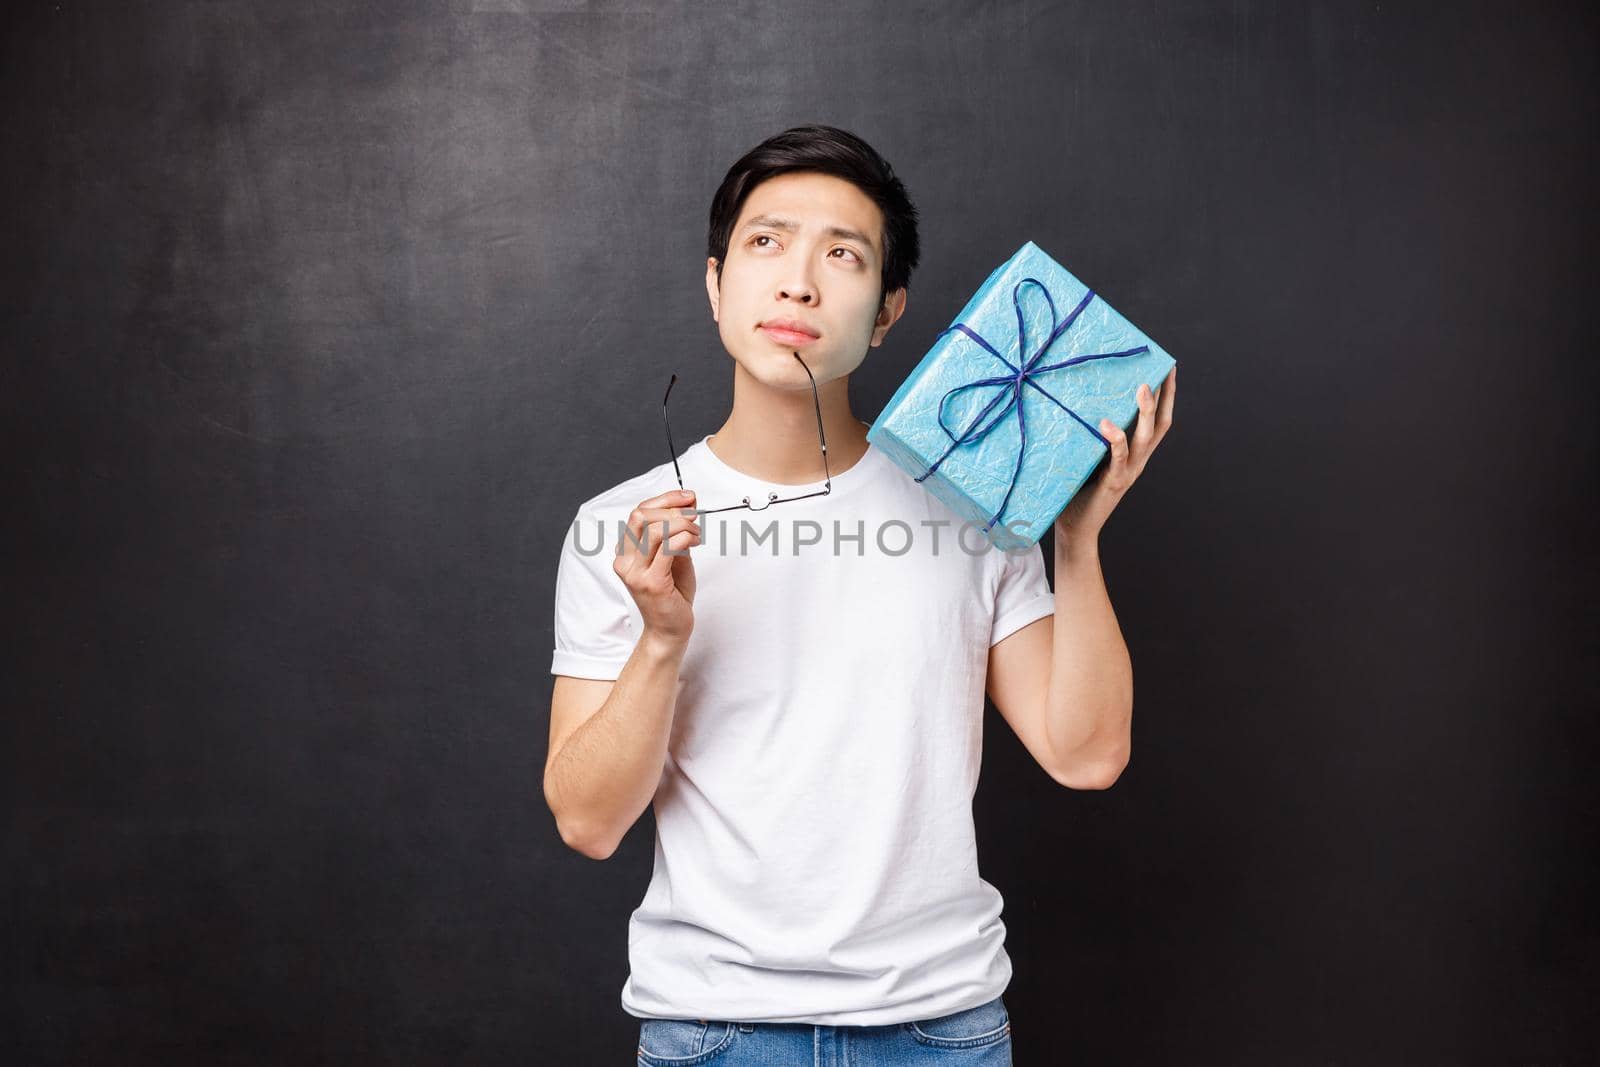 Celebration, holidays and lifestyle concept. Thoughtful and dreamy young handsome asian man celebrating birthday, thinking trying guess whats inside blue b-day box, stand black background.